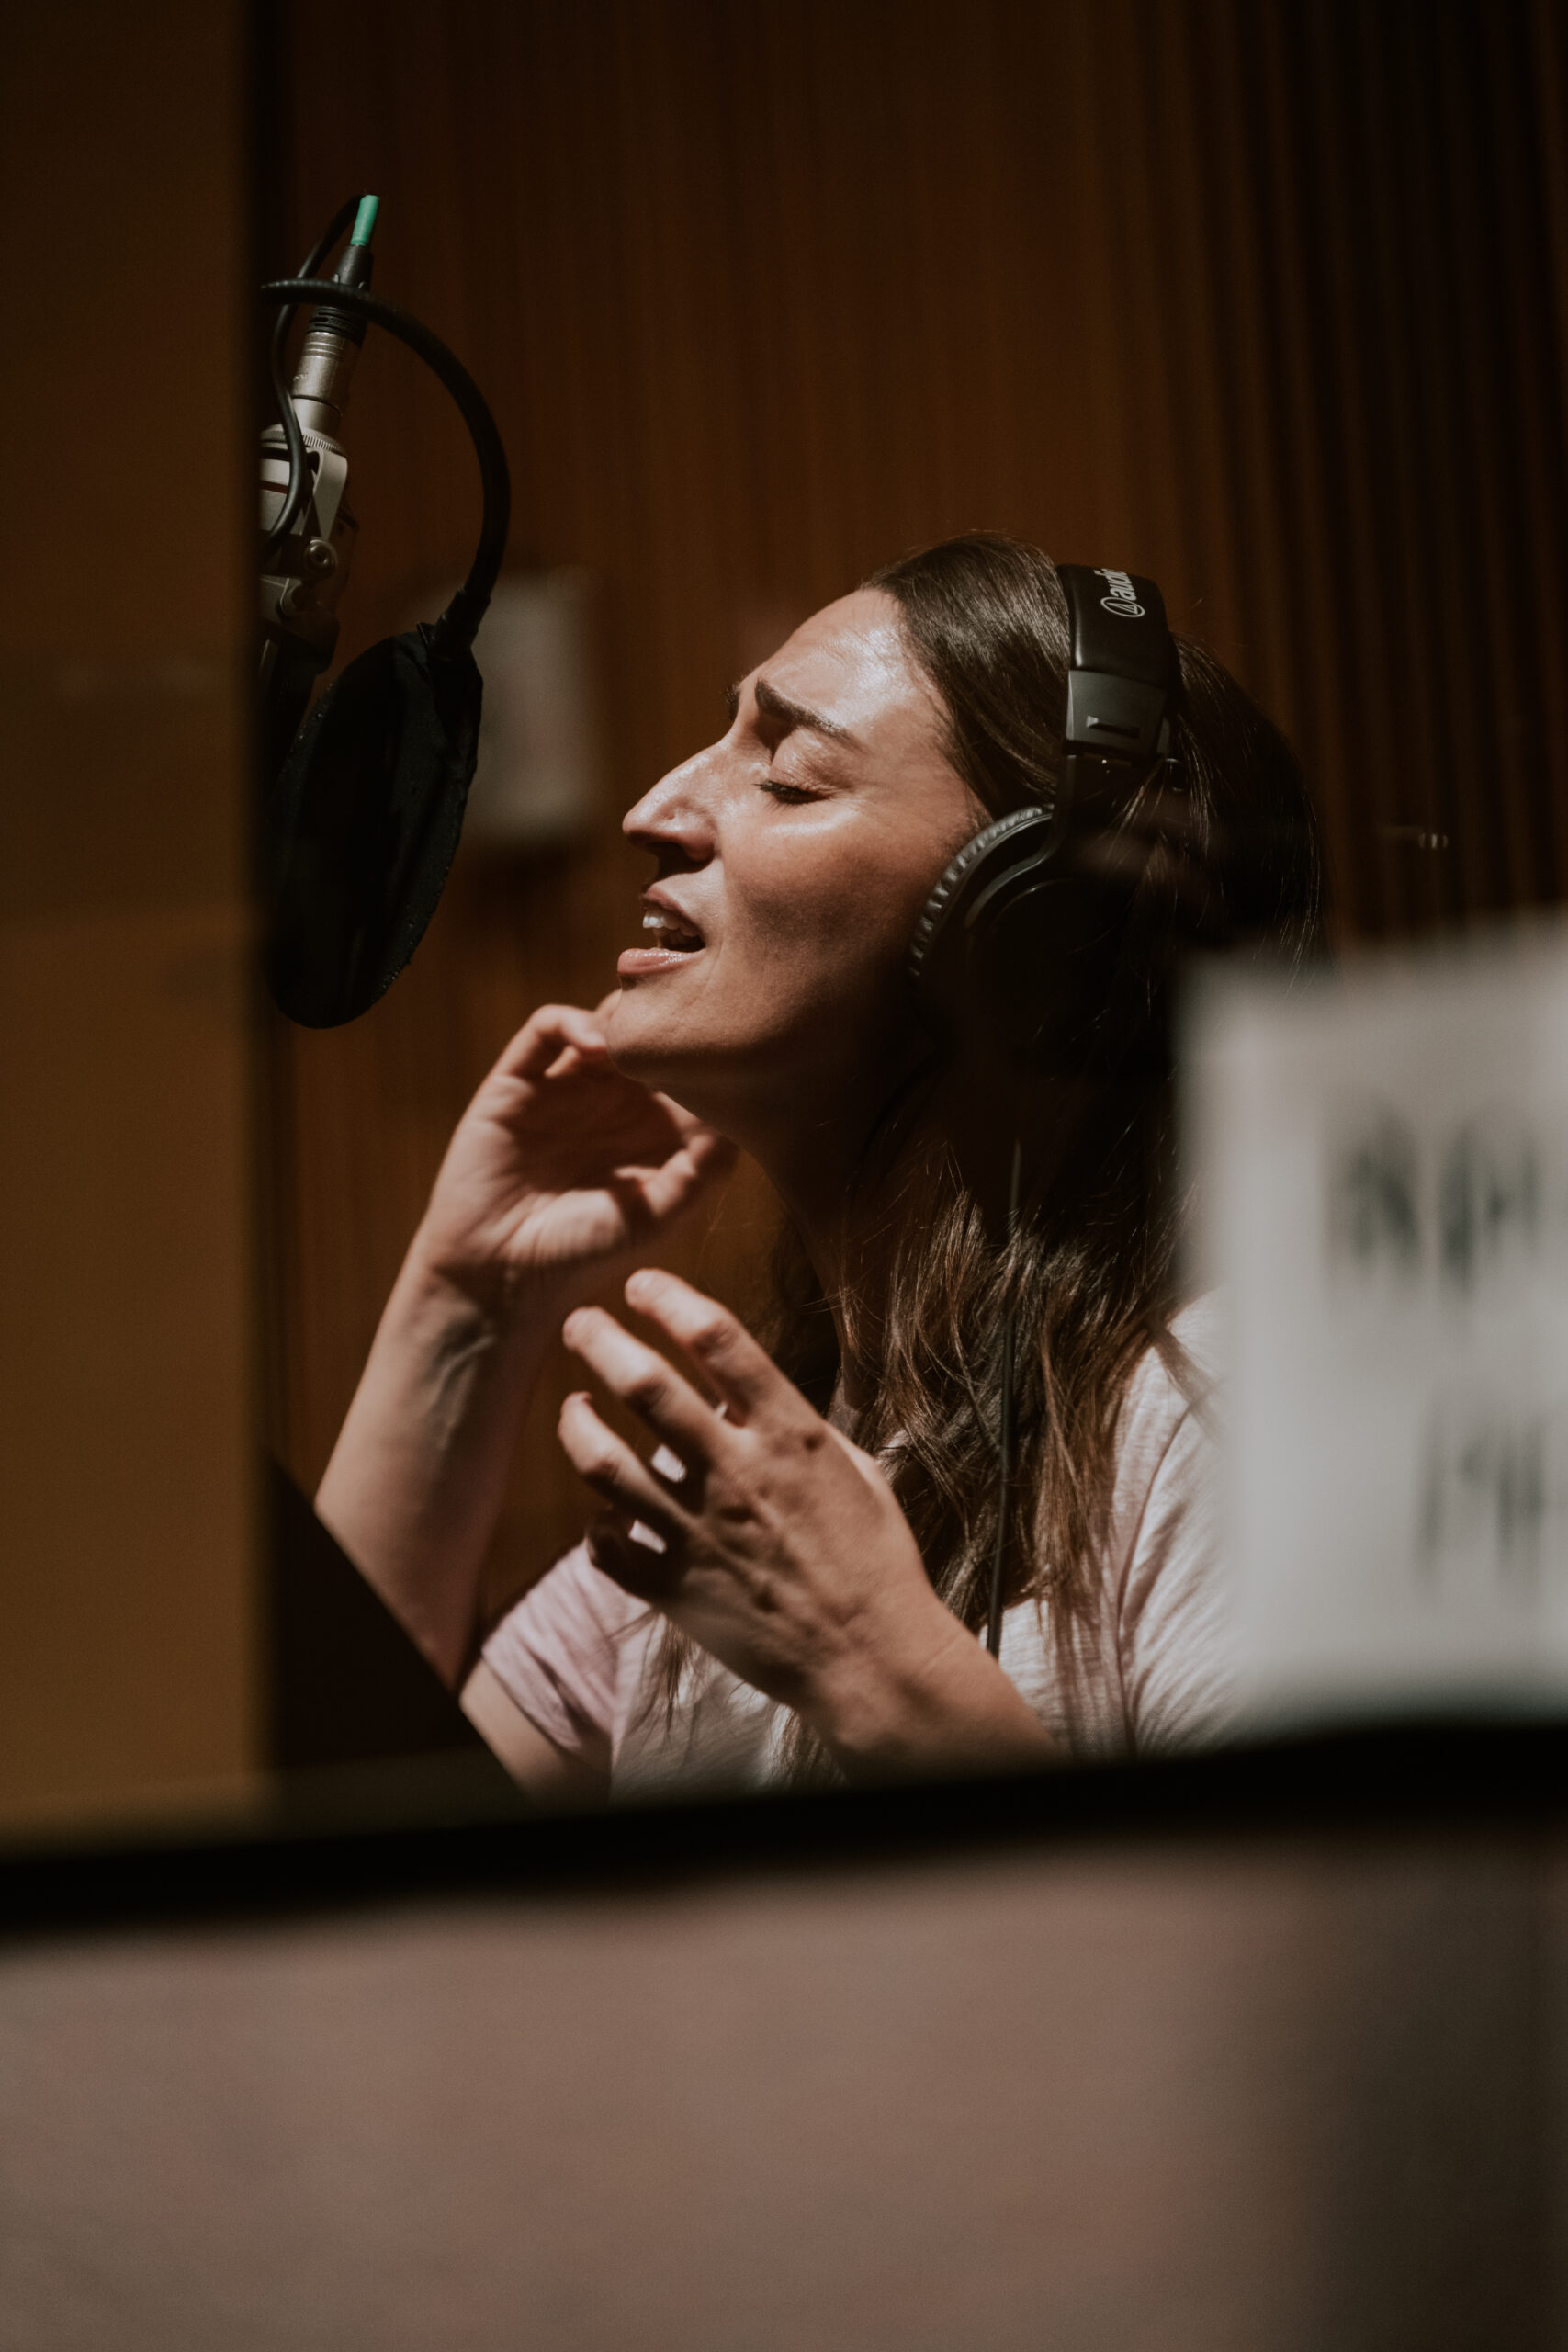 First listen to Sara Bareilles singing "Moments in the Woods" from Into the Woods. Photo by Andy Henderson.